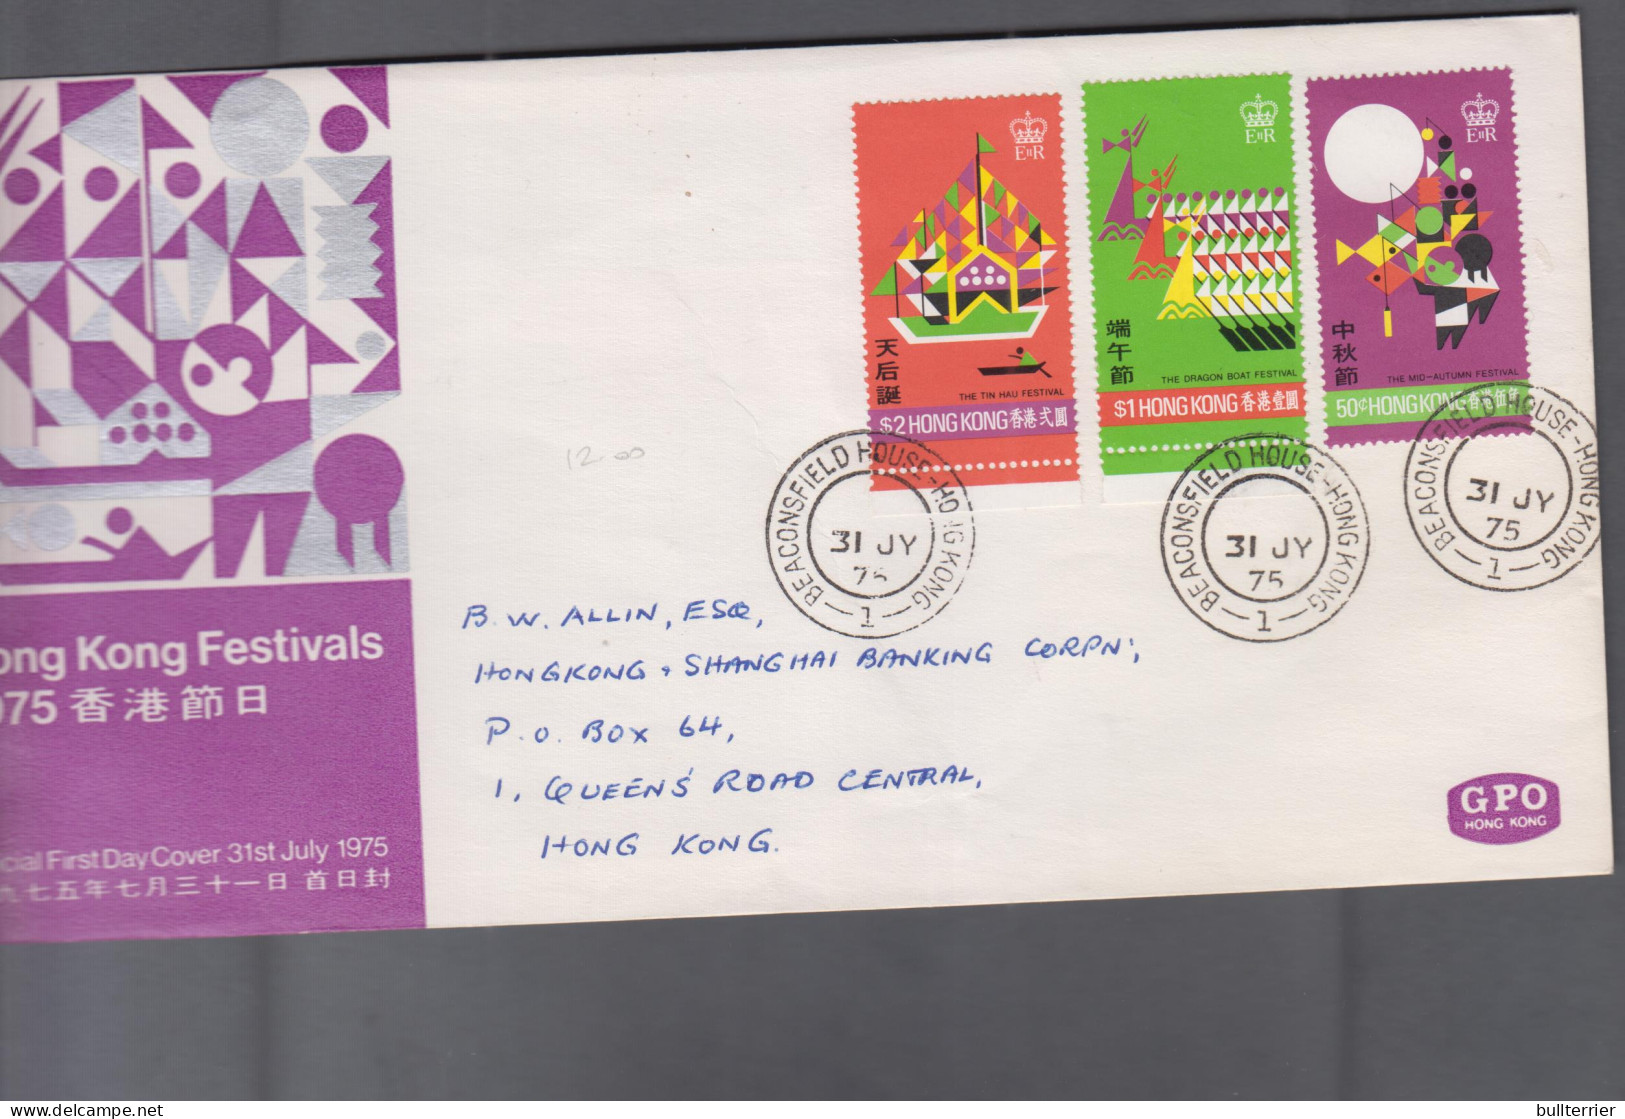 HONG KONG - 1975 - HONG KONG FESTIVALS SET OF 3 ON FDC,  SG CAT £12.50+ AS USED STAMPS - Covers & Documents